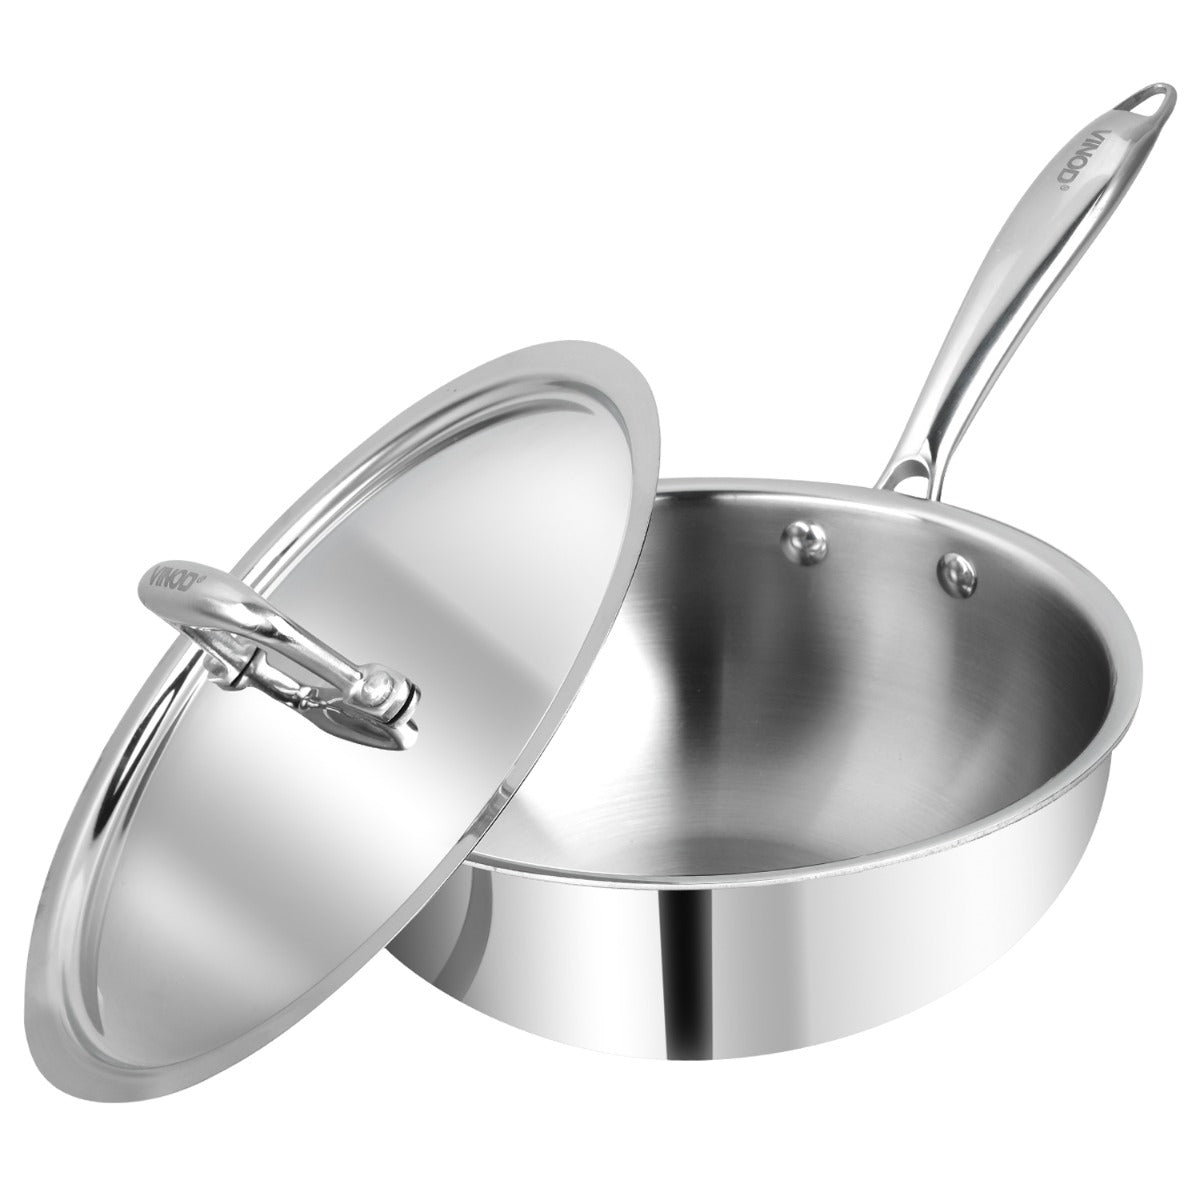 Vinod Platinum Triply Stainless Steel Deep Frypan with Lid (Induction Friendly)